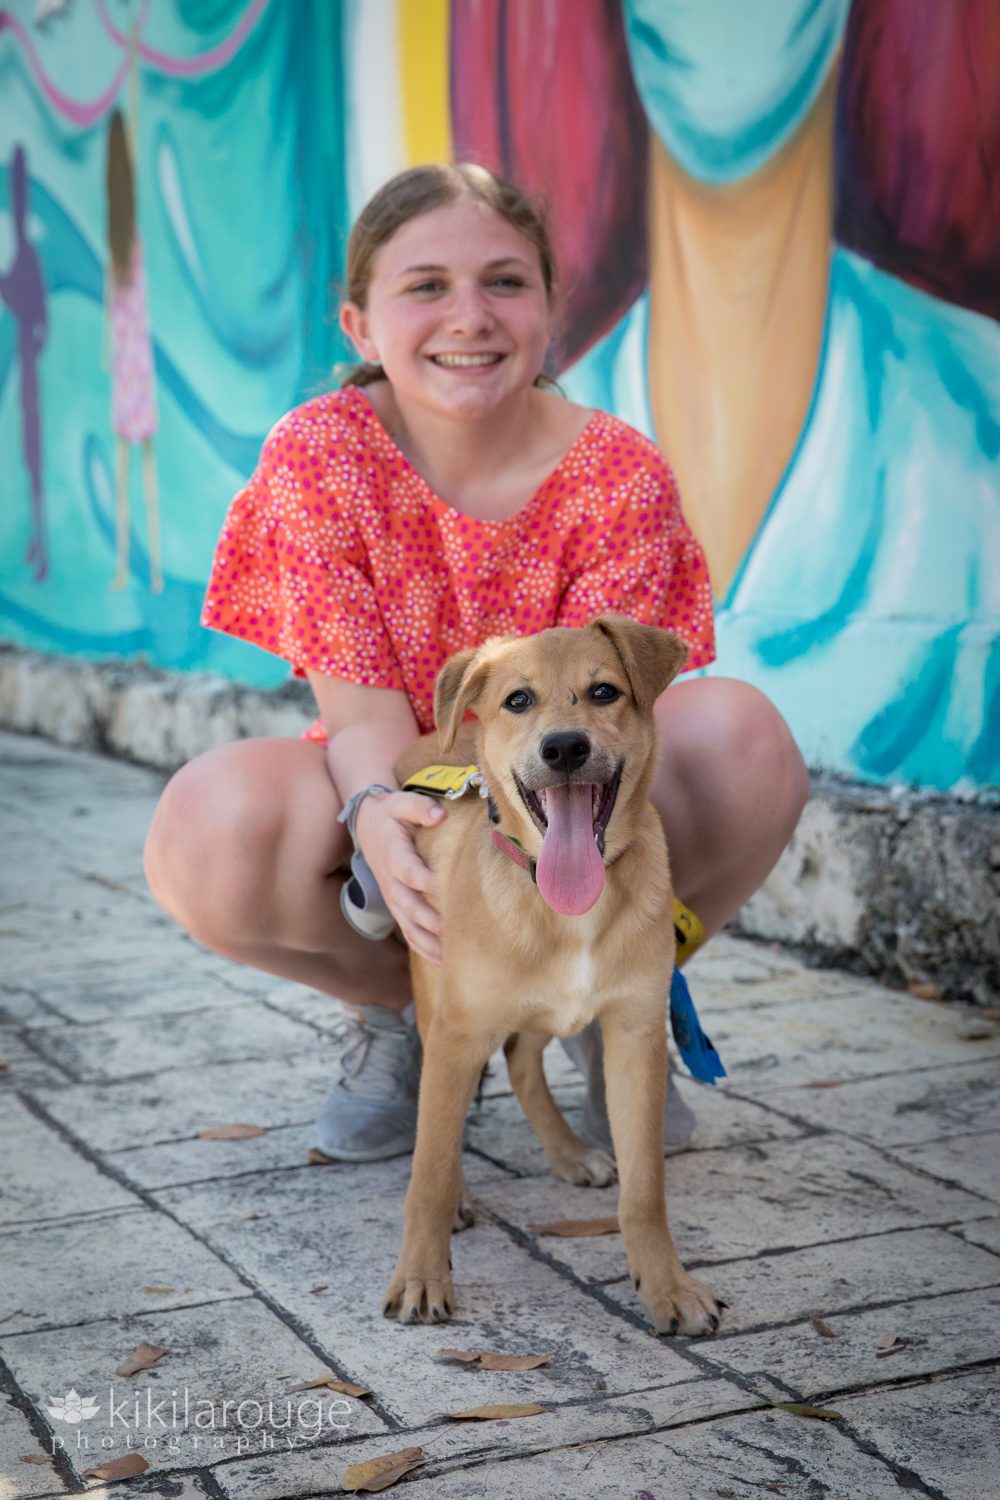 Young girl in orange floral shirt posing on sidewalk with tan puppy with tongue out